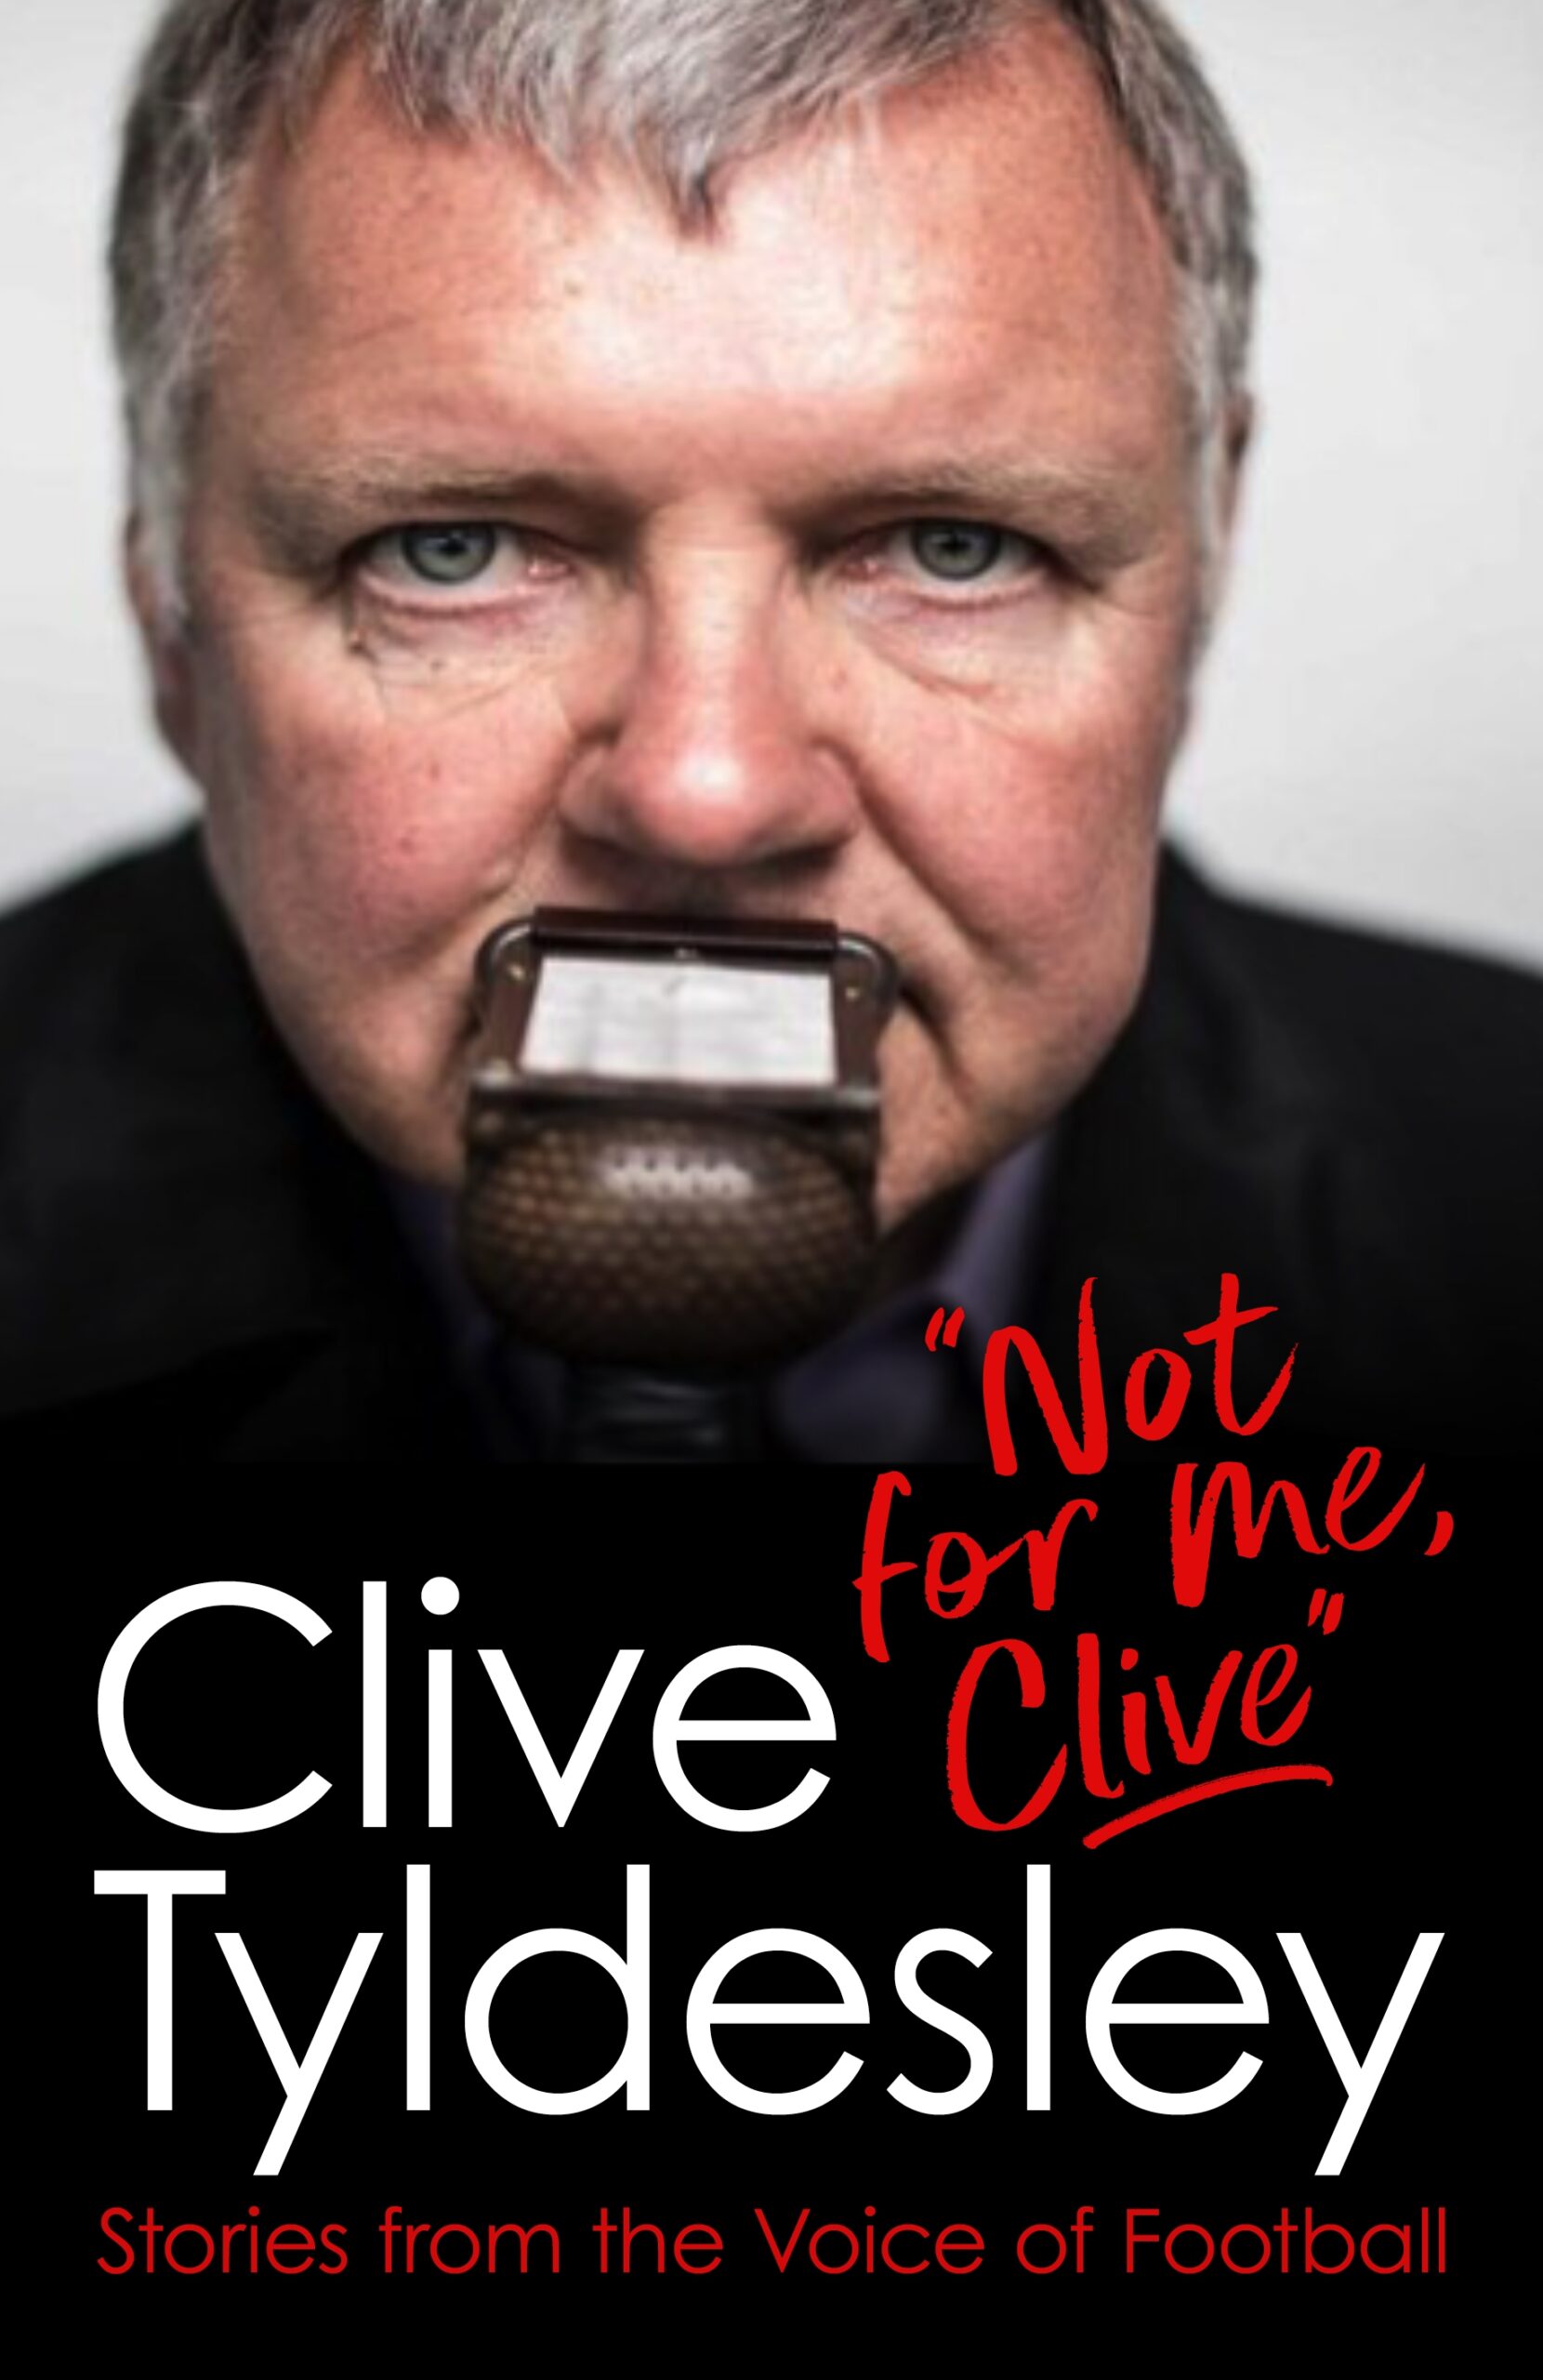 Not For Me Clive by Clive Tyldesley